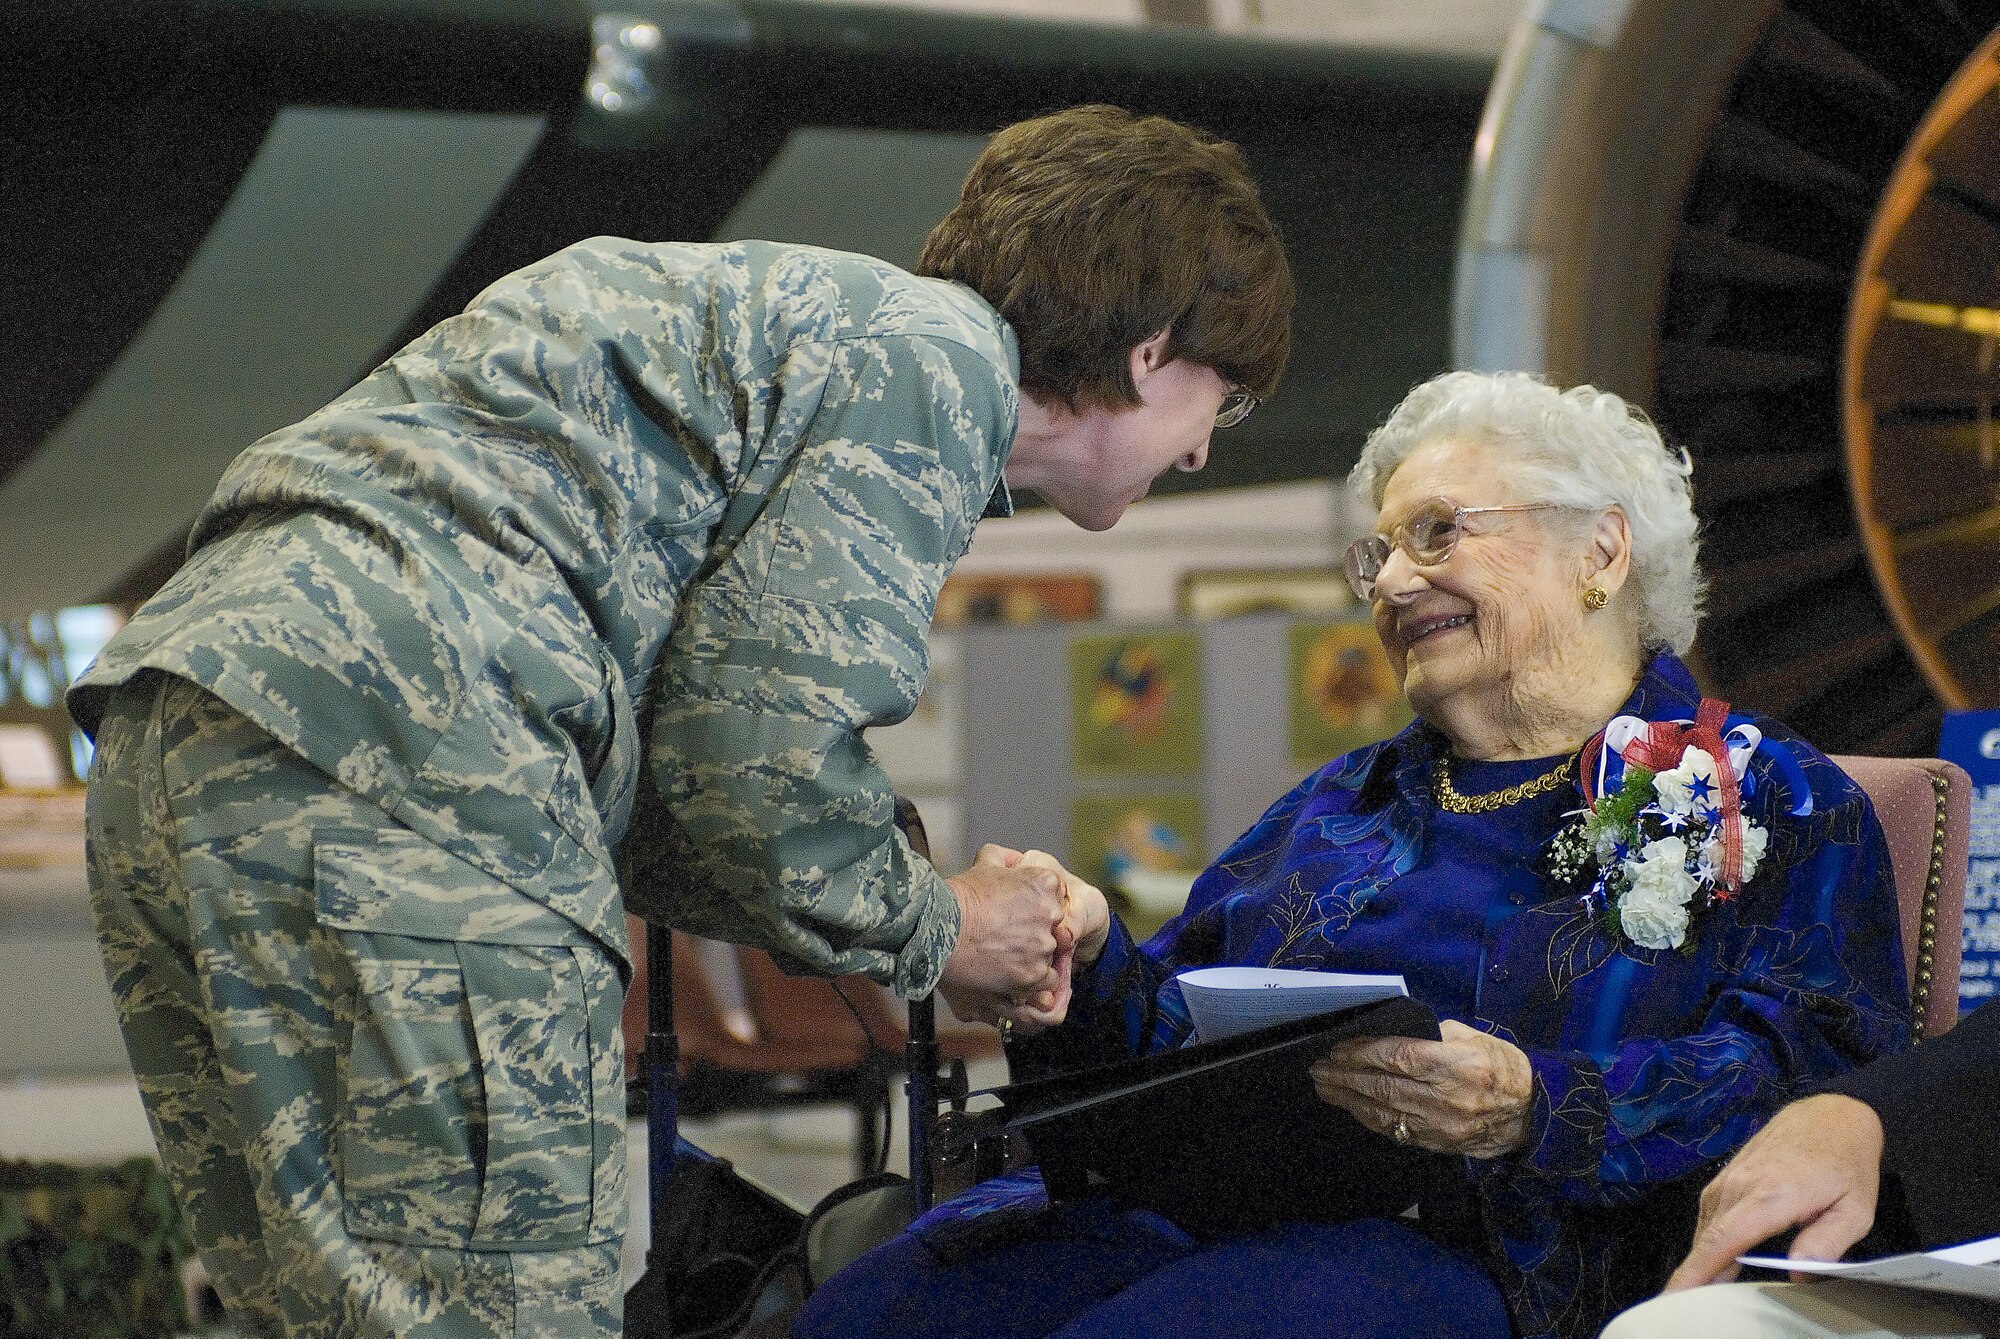 Lt. Col. Marcia Potter, 436th Medical Group chief nurse, presents Dorothy Lewis with the Nurse’s coin of the U.S. Air Force during the ceremony May 9 at the Air Mobility Command Museum. (U.S. Air Force photo/Roland Balik)